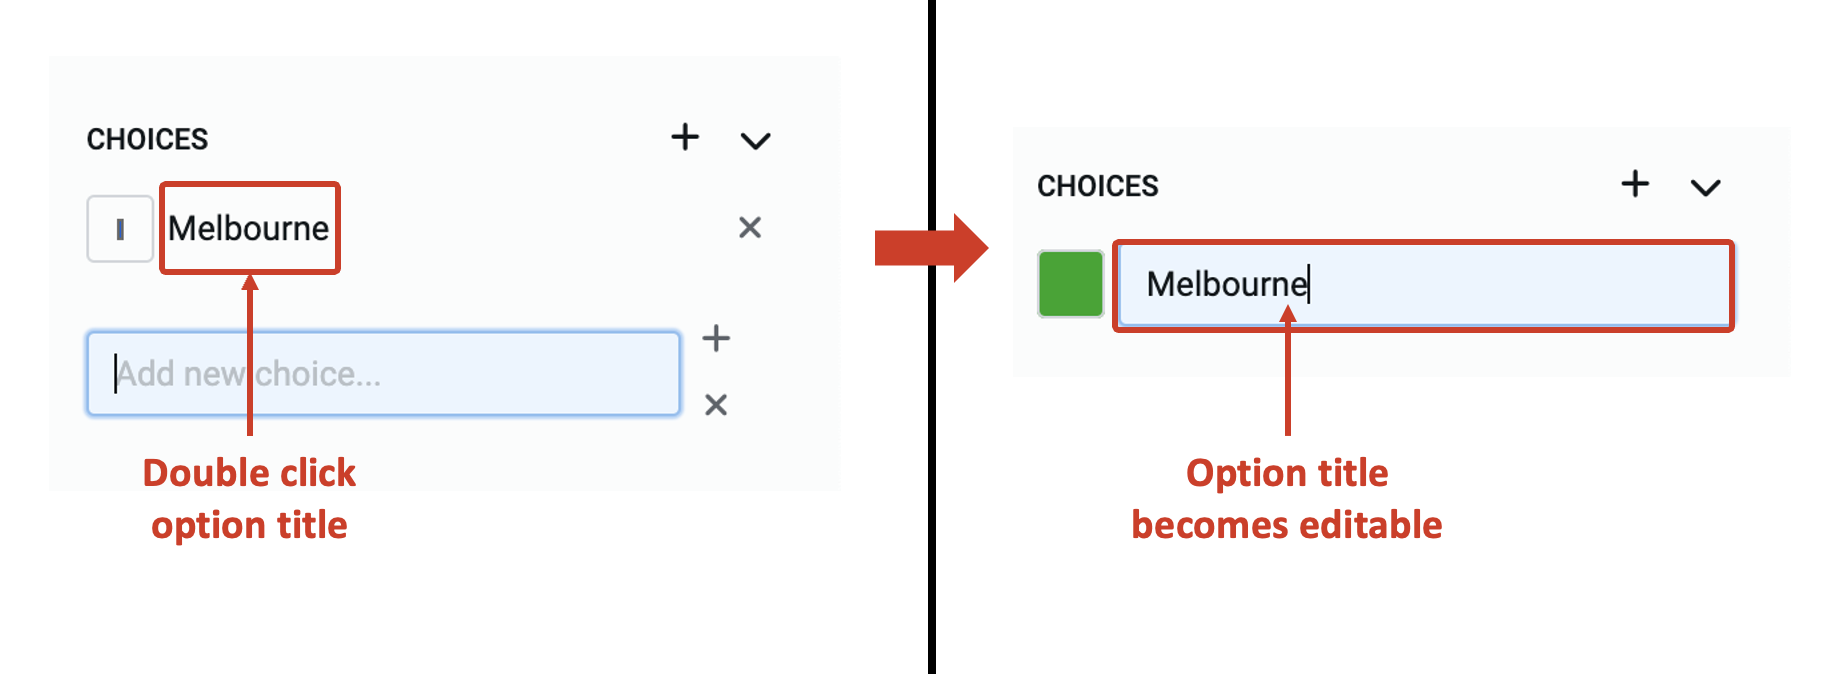 Image showing editing of option title